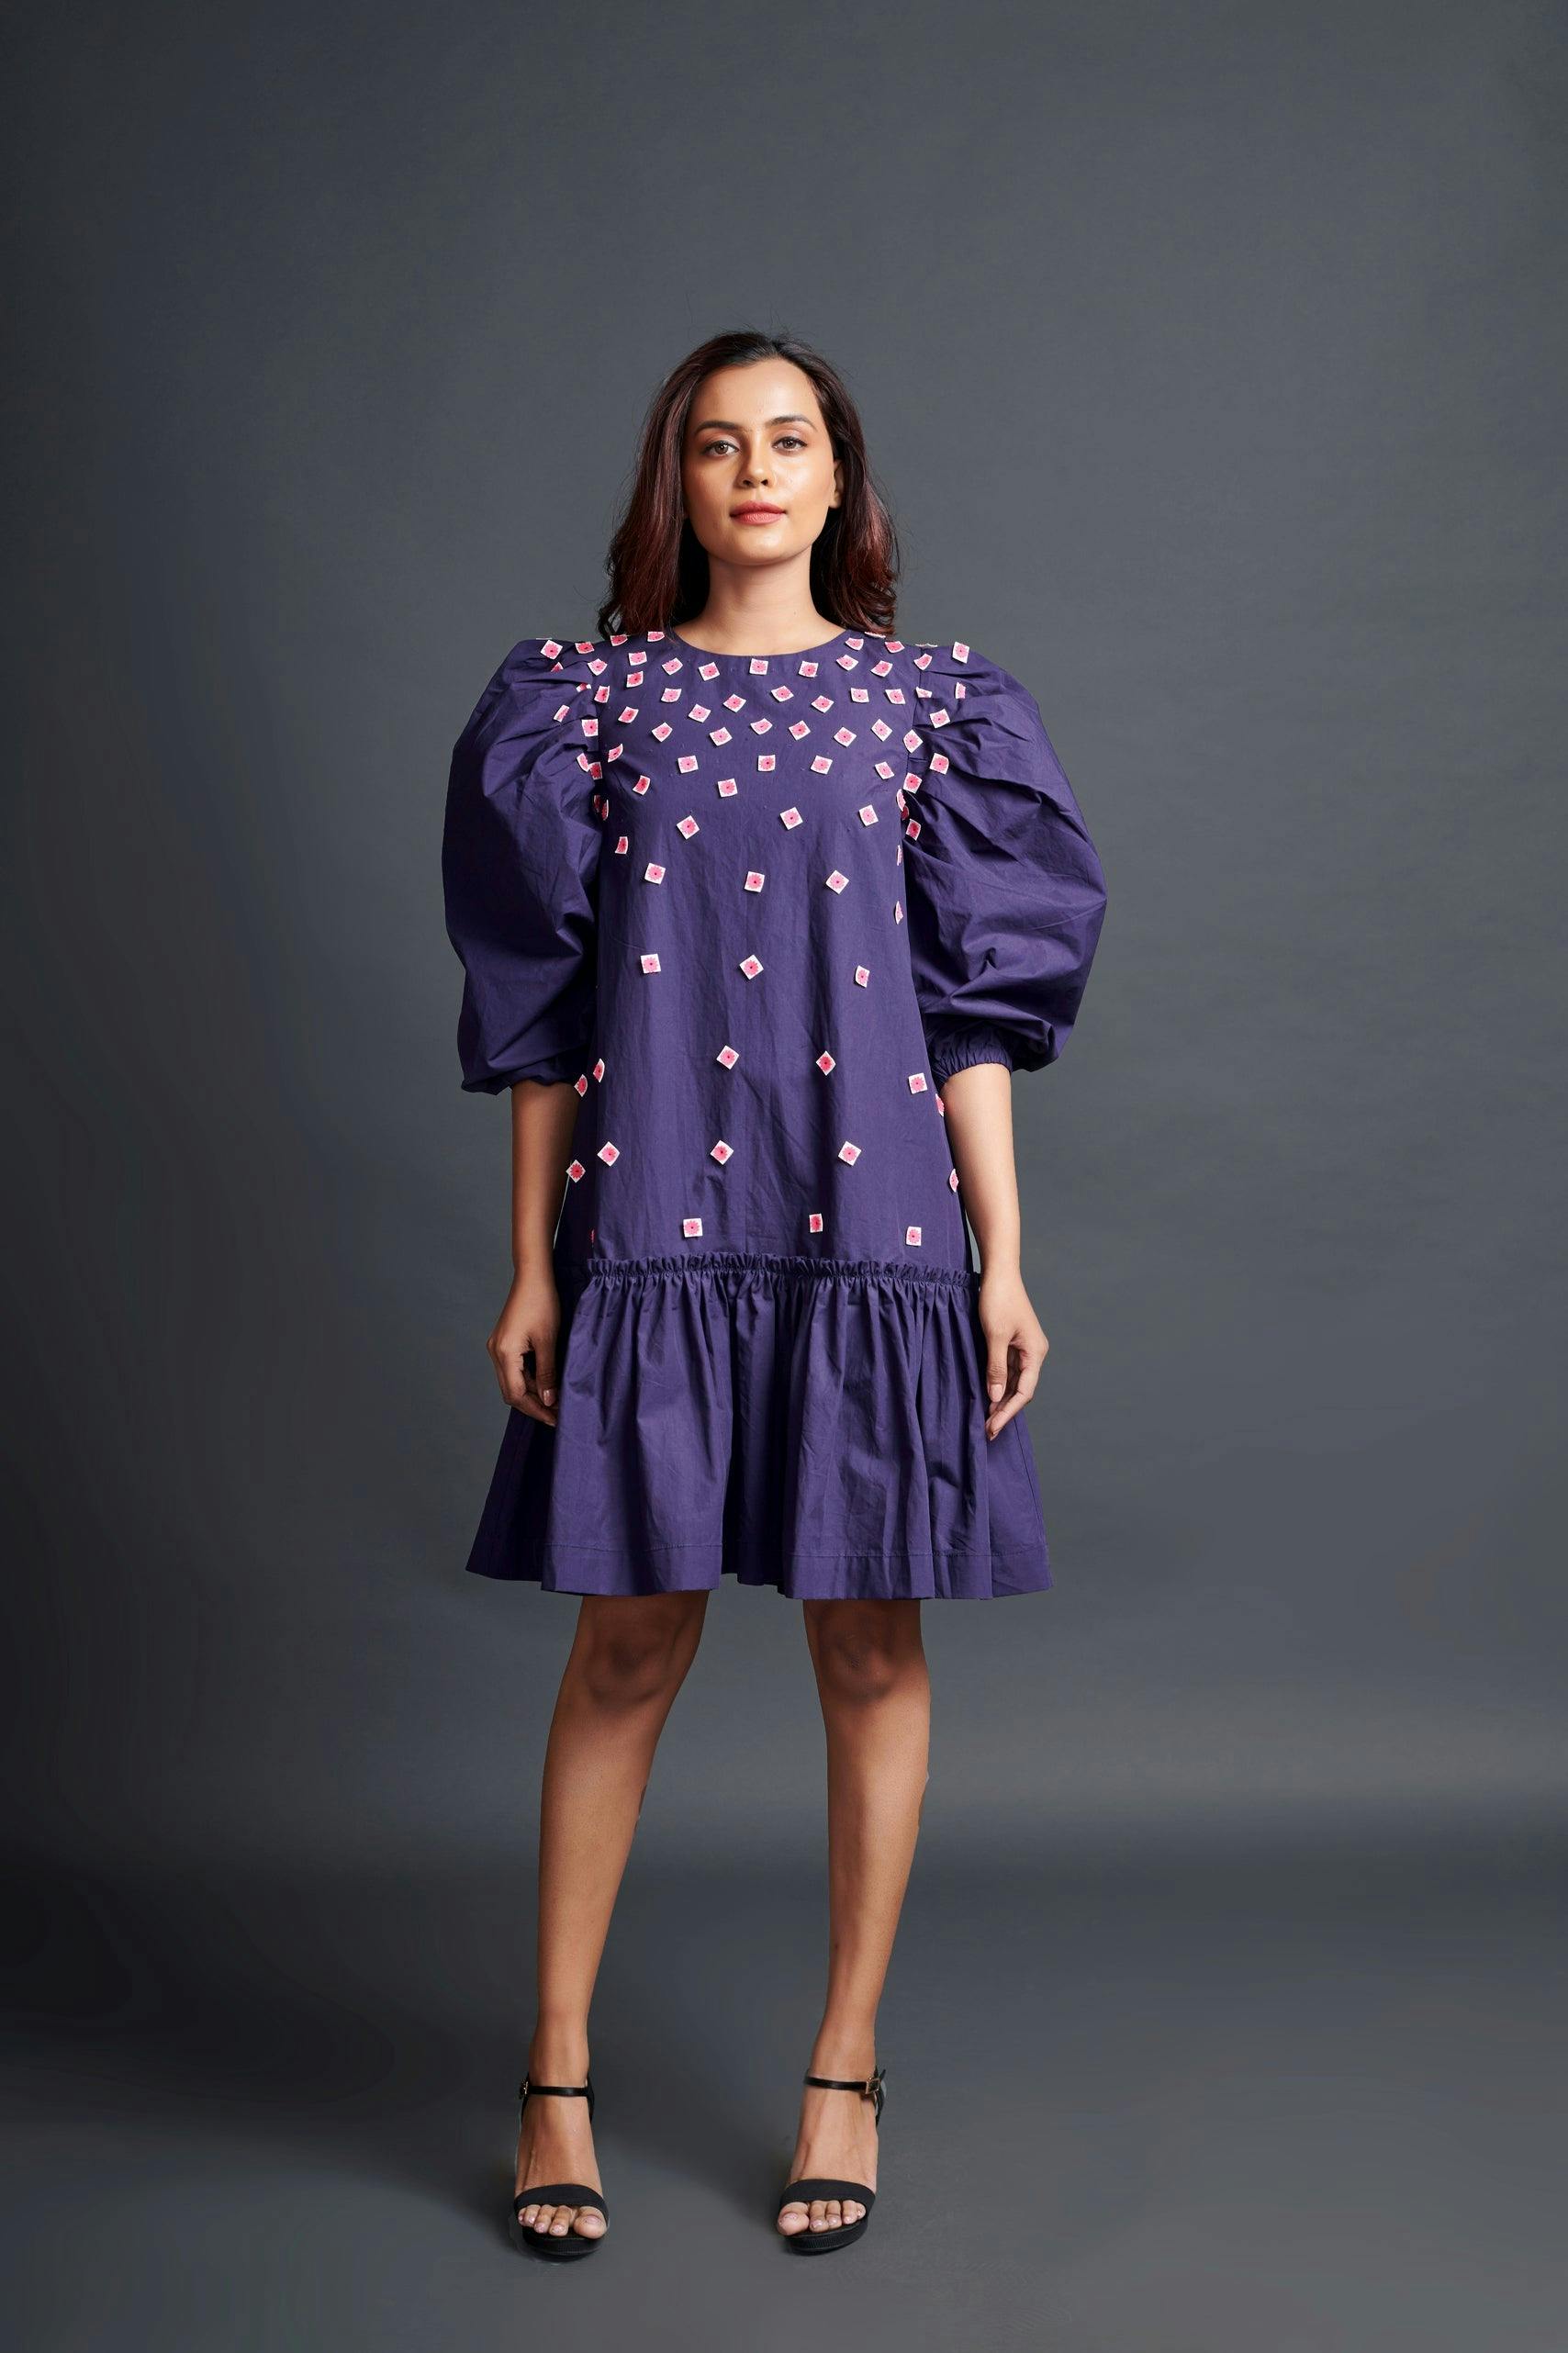 WF-1102-PURPLE ::: Purple Short Backless Dress With Embroidery, a product by Deepika Arora